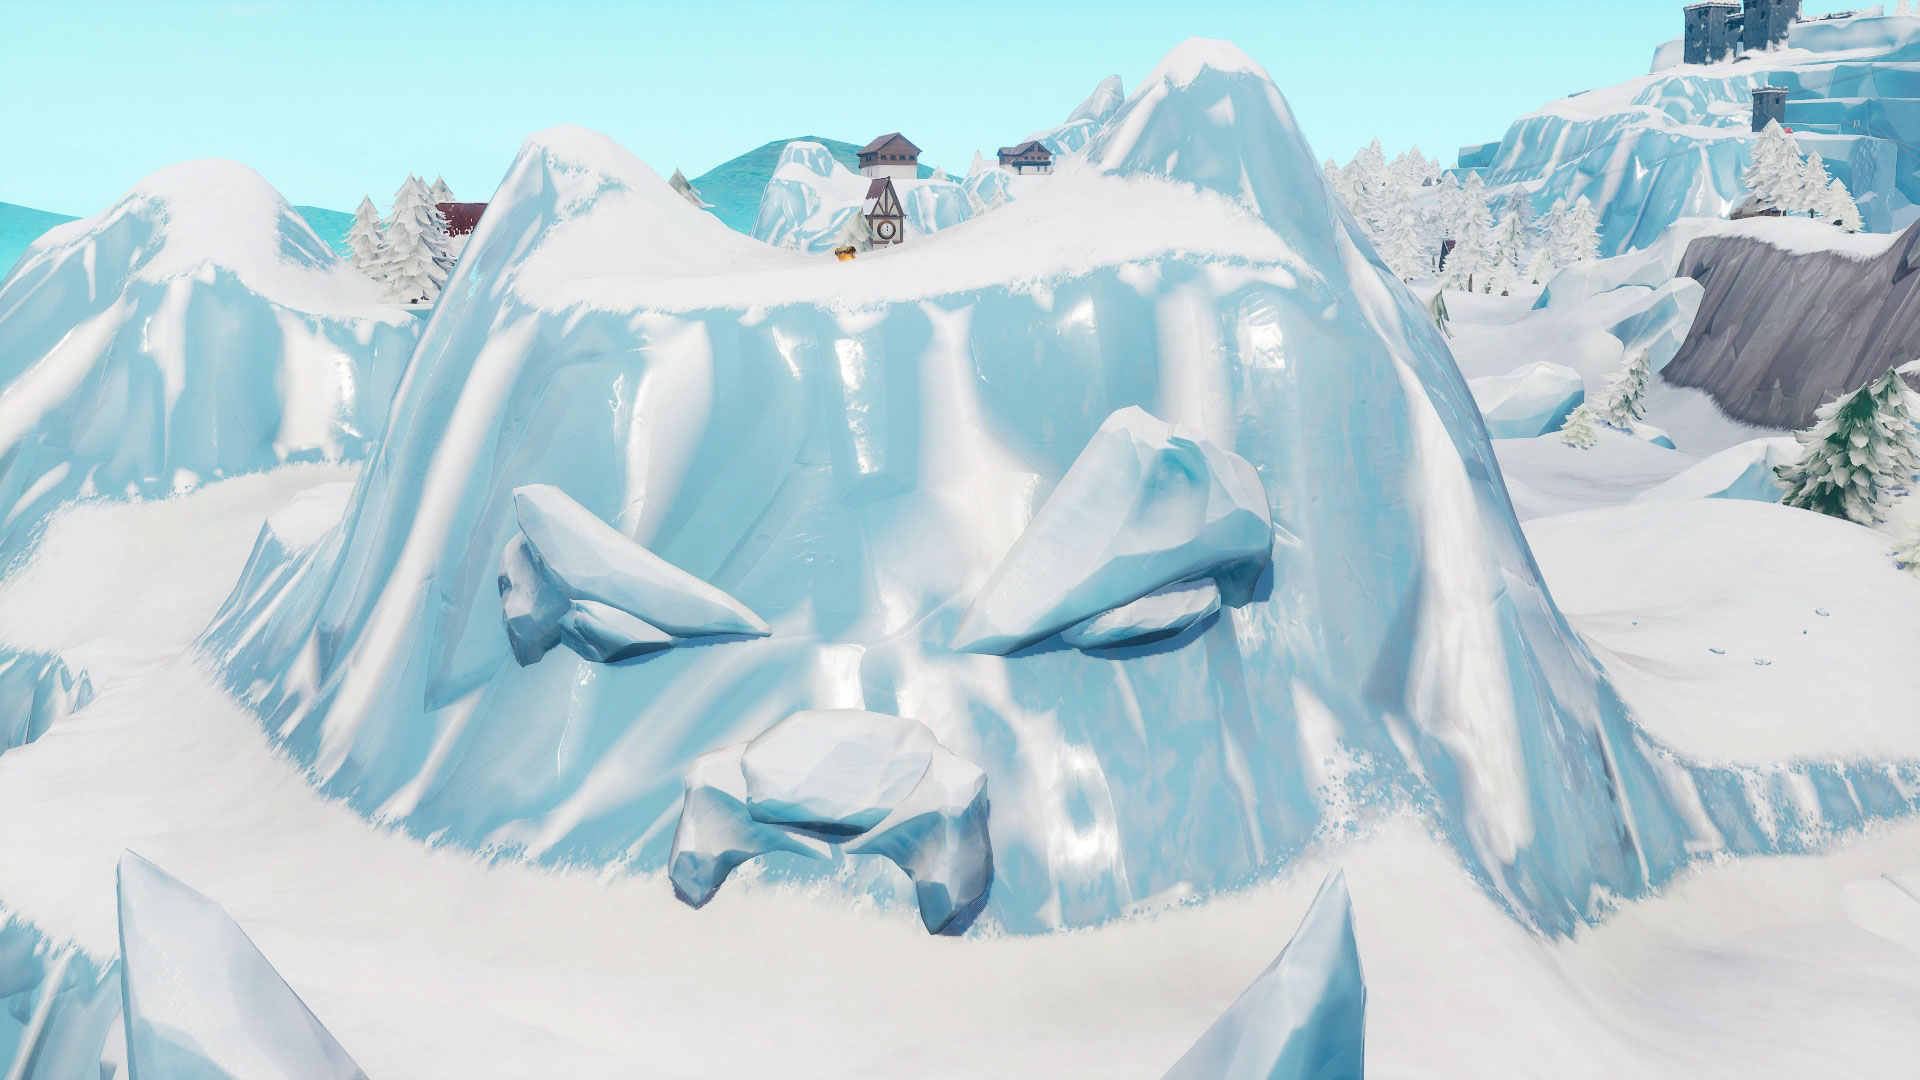 Where To Visit A Giant Face In The Desert The Jungle And The Snow - where to visit a giant face in the desert the jungle and the snow in fortnite season 8 week 1 challenge gamesradar